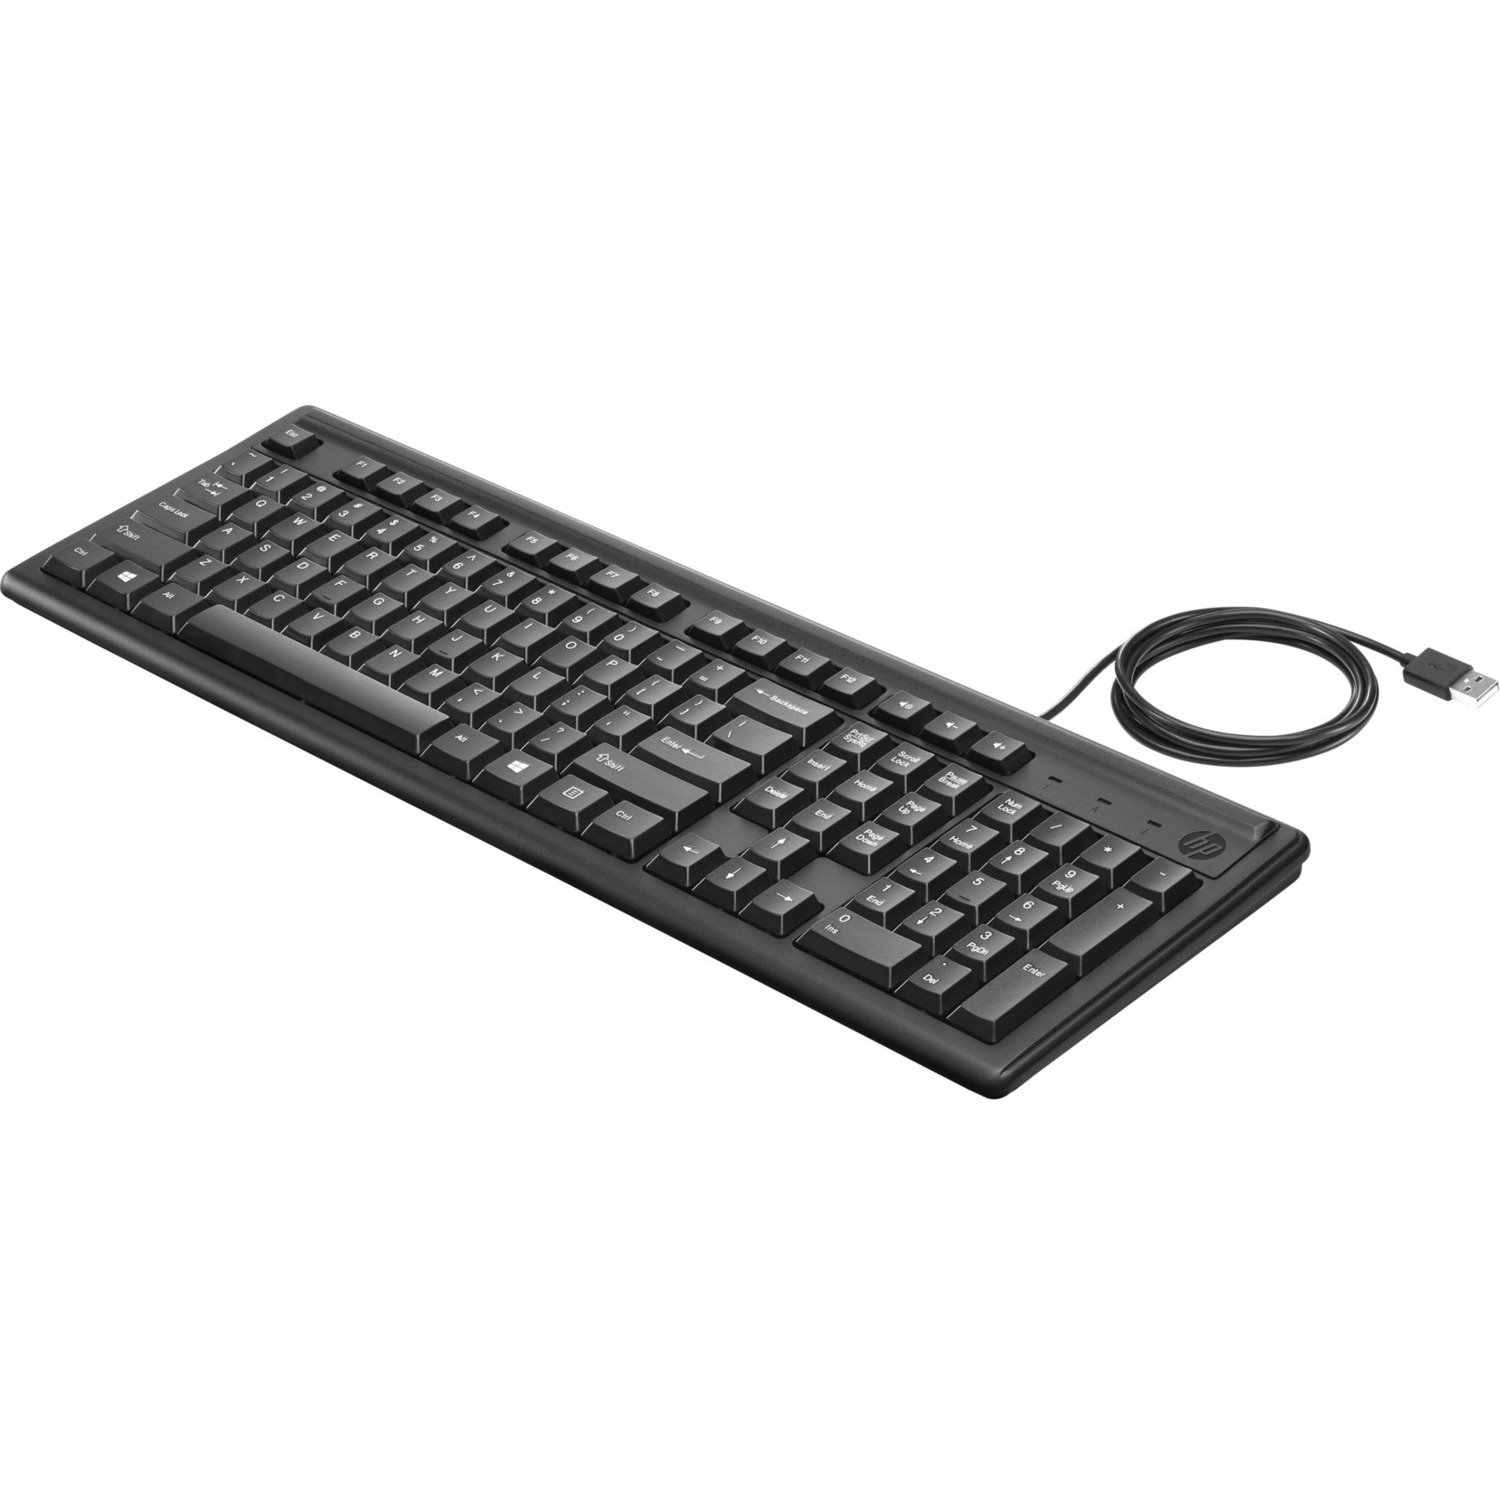 HP 100 Keyboard - Cable Connectivity - USB Interface - Black